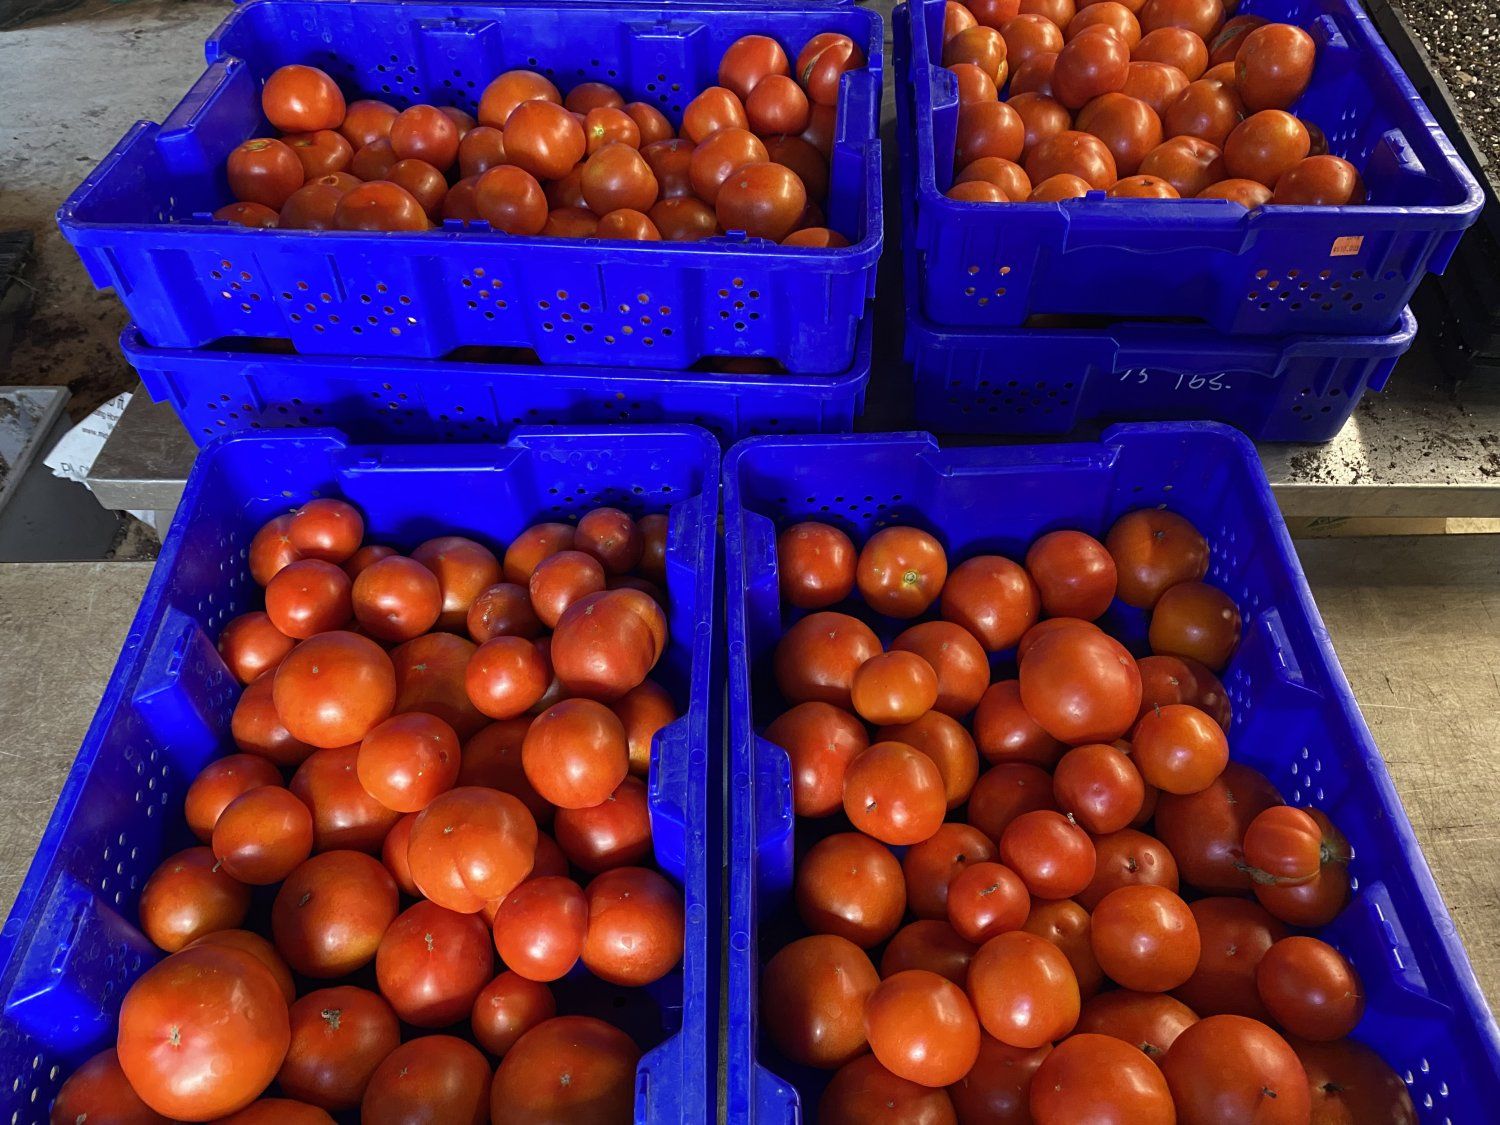 Next Happening: Tomato Mania (Bulk Tomatoes Available While they Last!!!!)